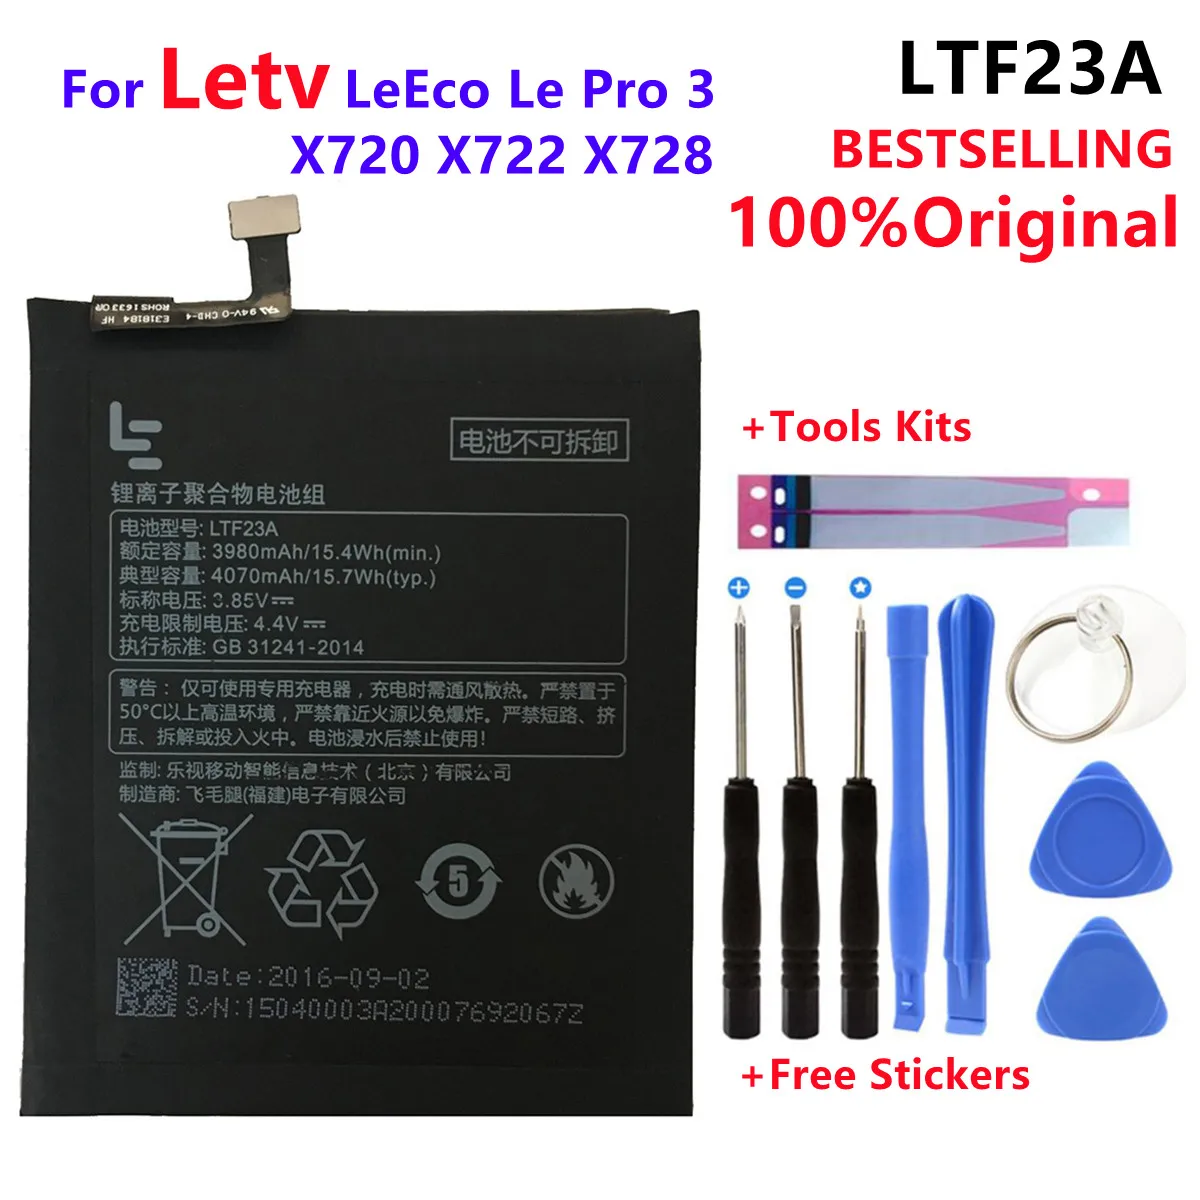 100% original Good quality Real LTF23A 4070mAh Battery For Letv LeEco Le Pro 3 X720 X722 X728 Battery Replacement best mobile charger Phone Batteries